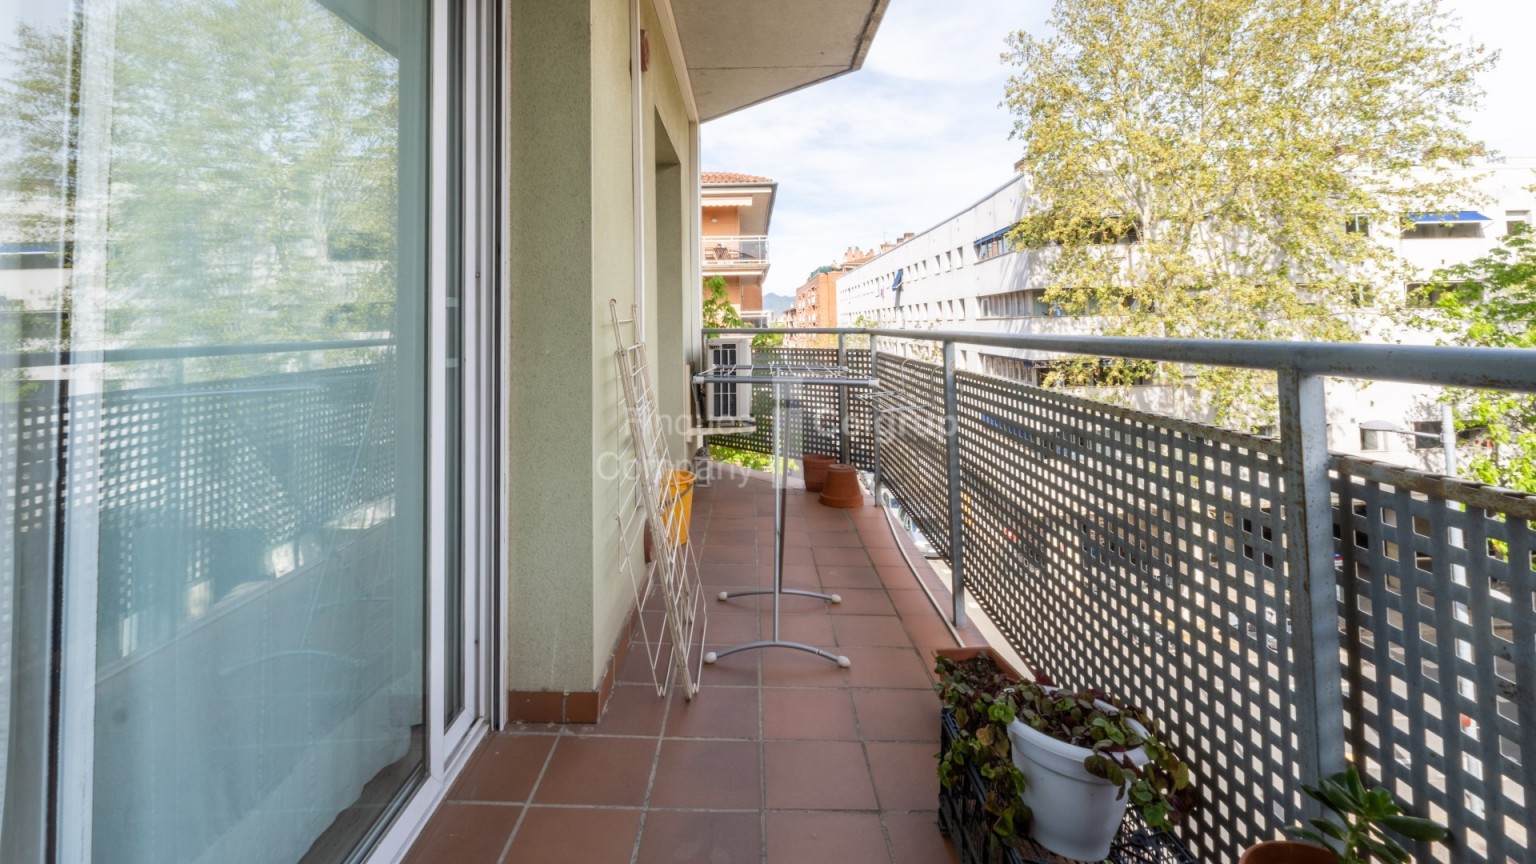 Apartment for sale in GIRONA with 88m2, 3 bedrooms, 2 bathrooms and parking